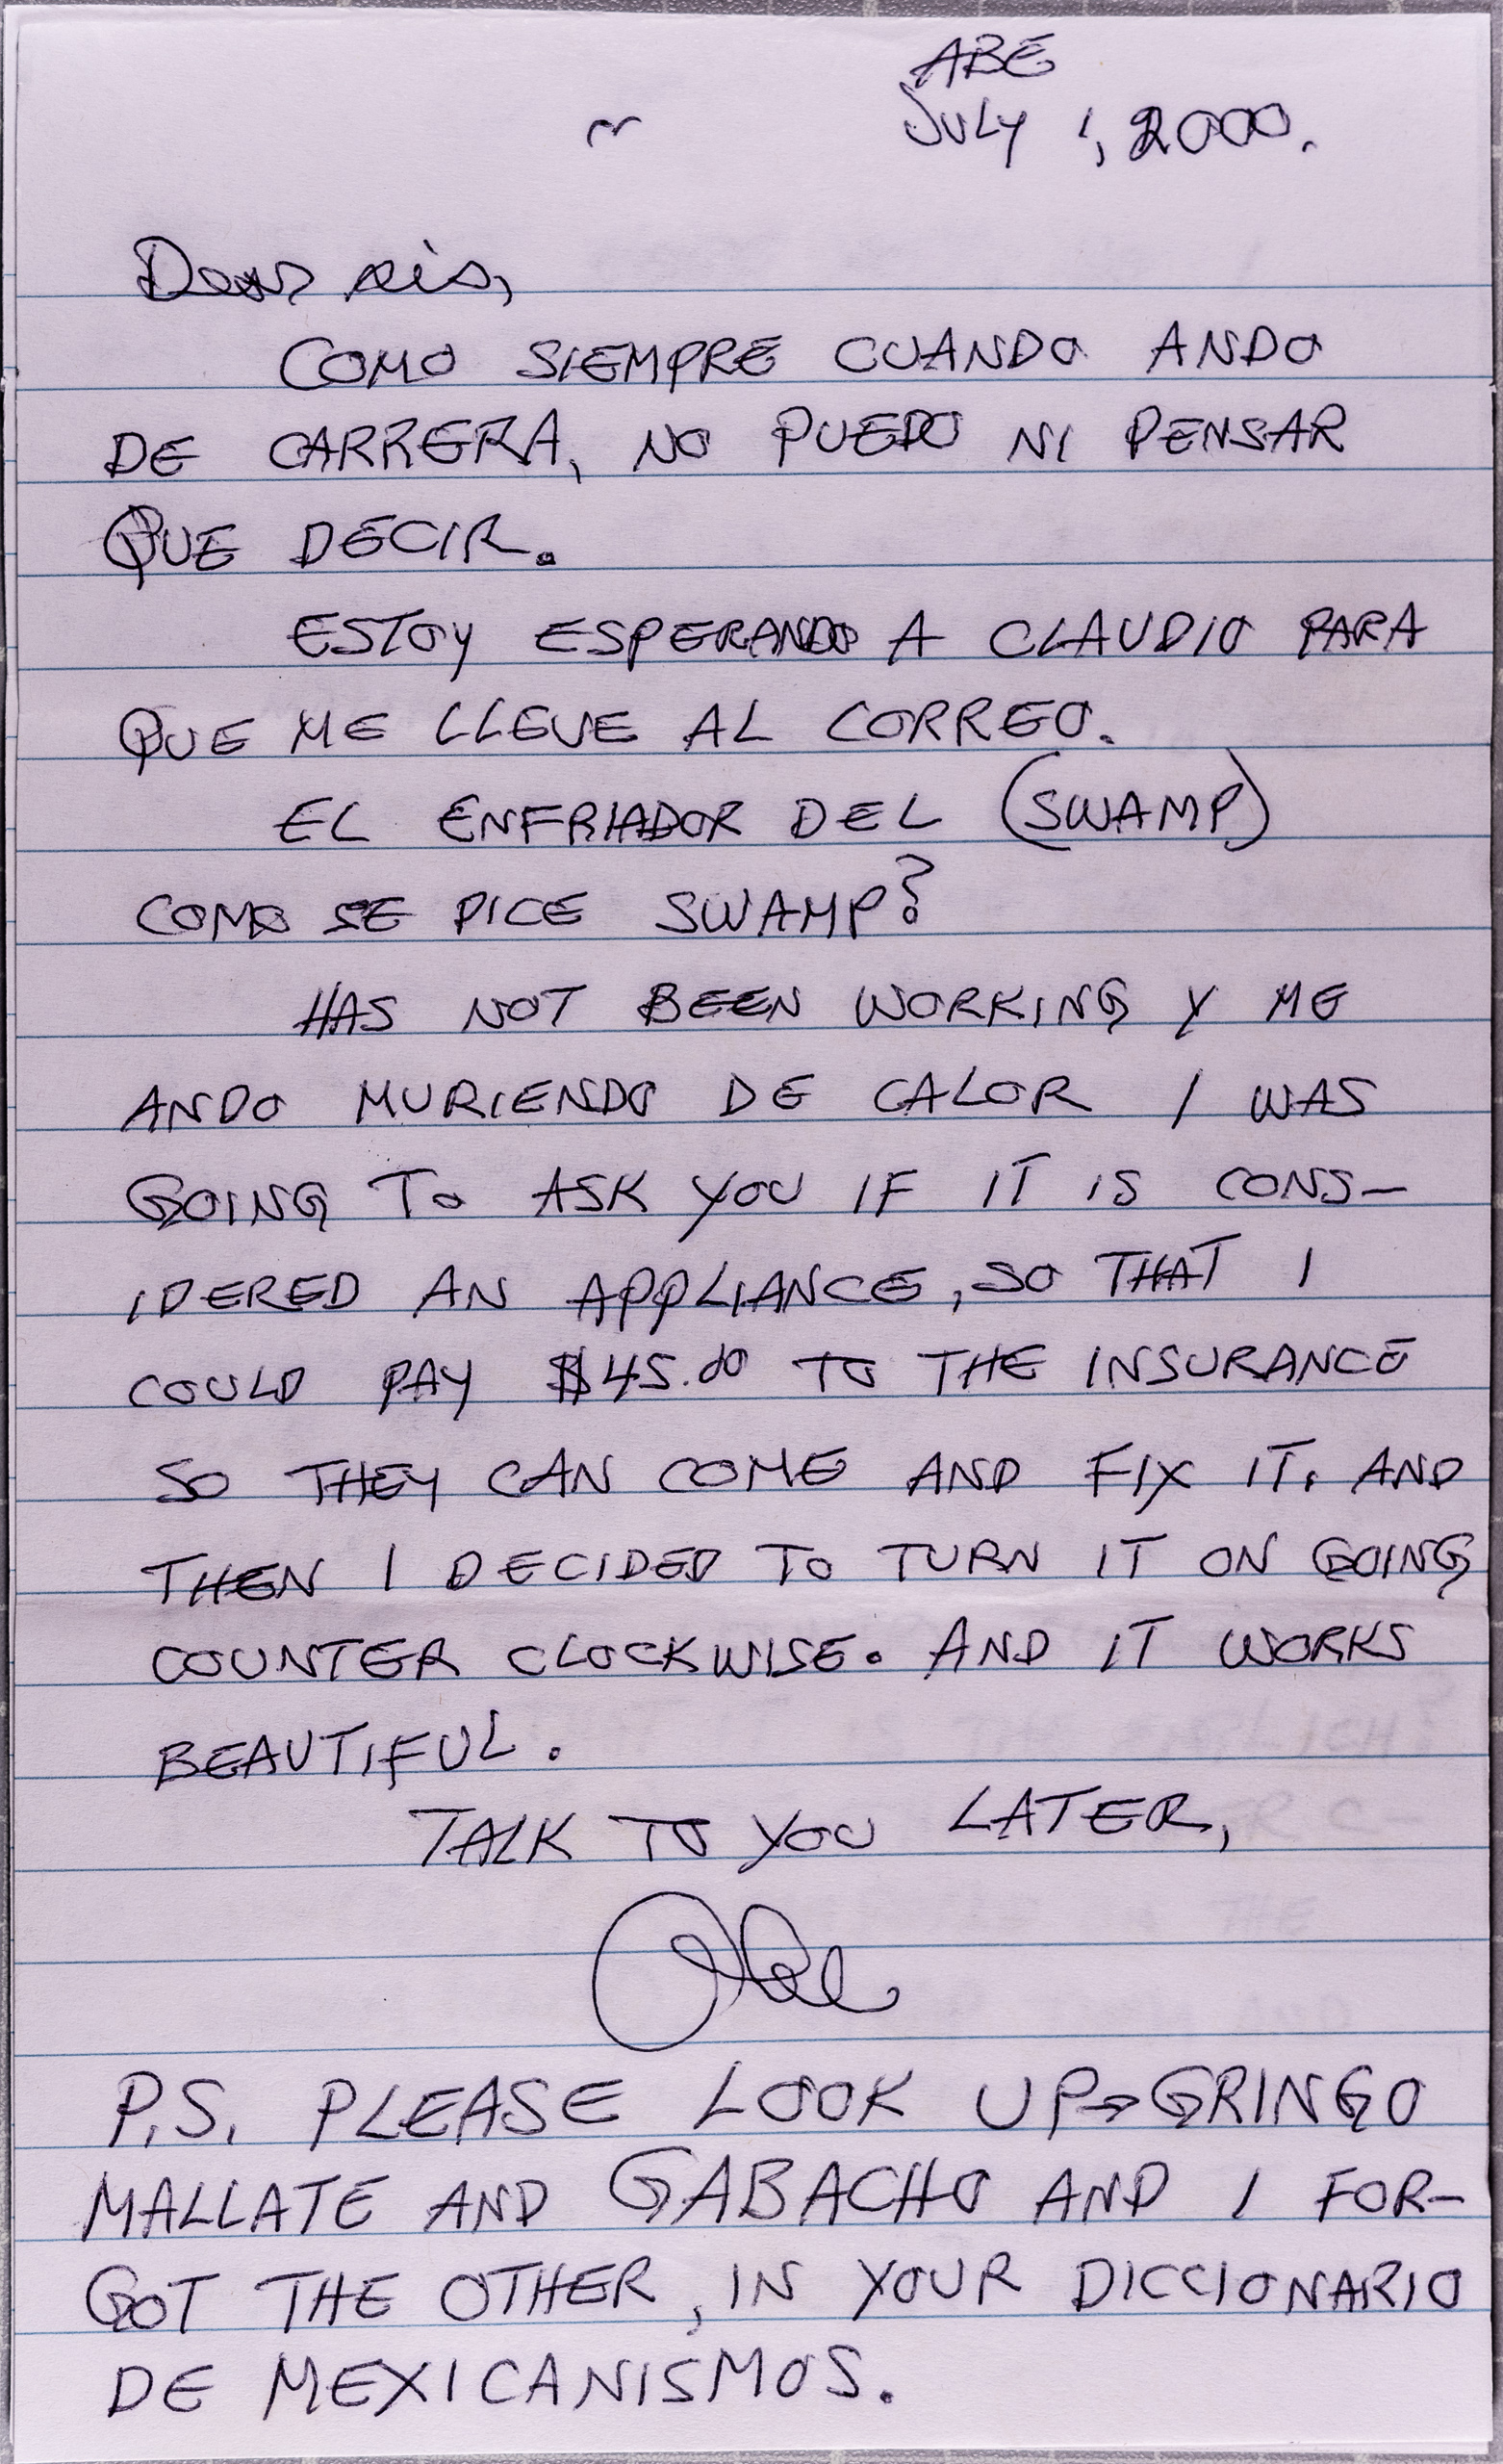 photo of a letter from Abe Perez (Reno, Nevada) to Cecilia P. Zucman (Monterey Park, CA) postmarked 13 July 2000.